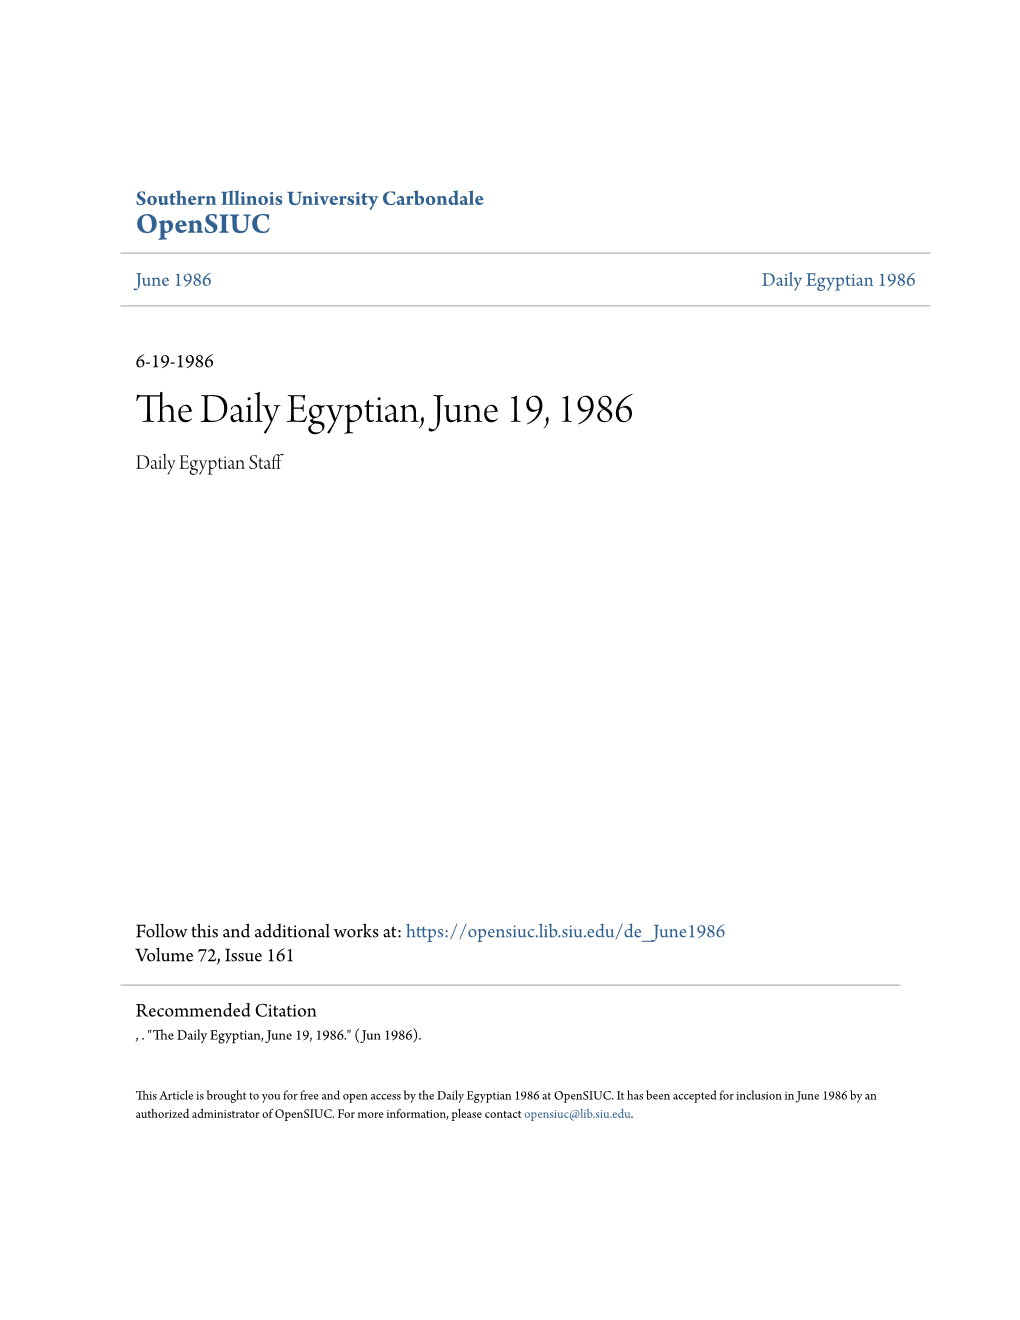 The Daily Egyptian, June 19, 1986